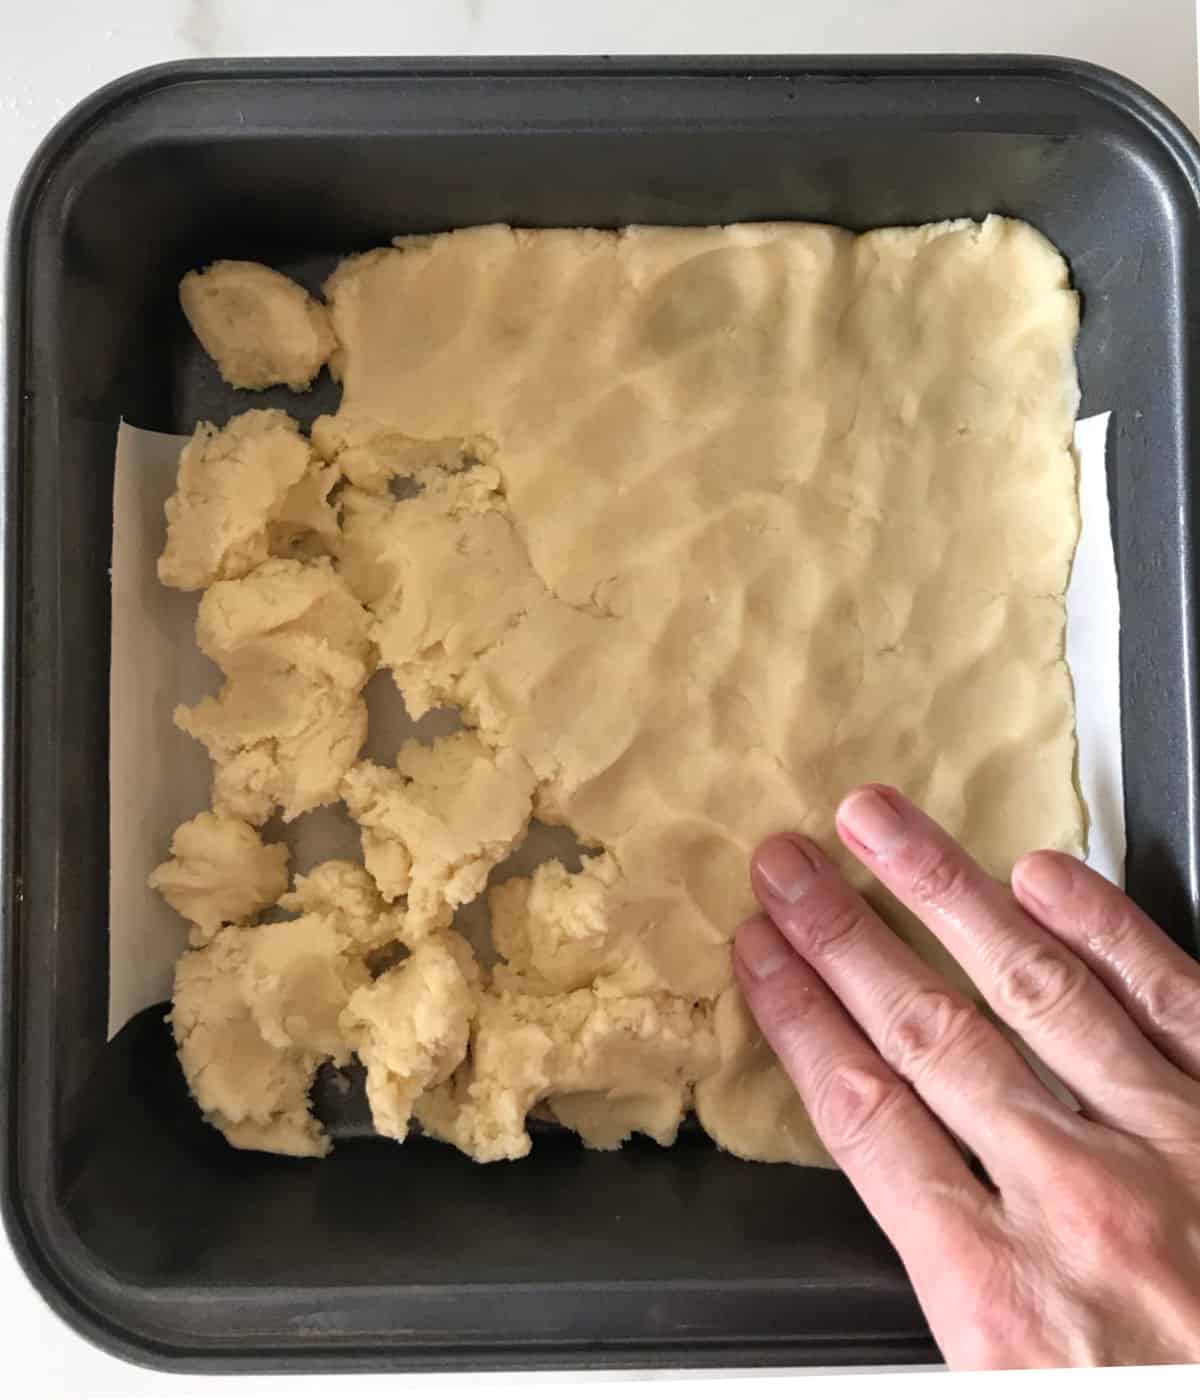 Patting shortbread dough with a hand into a dark metal square baking pan.